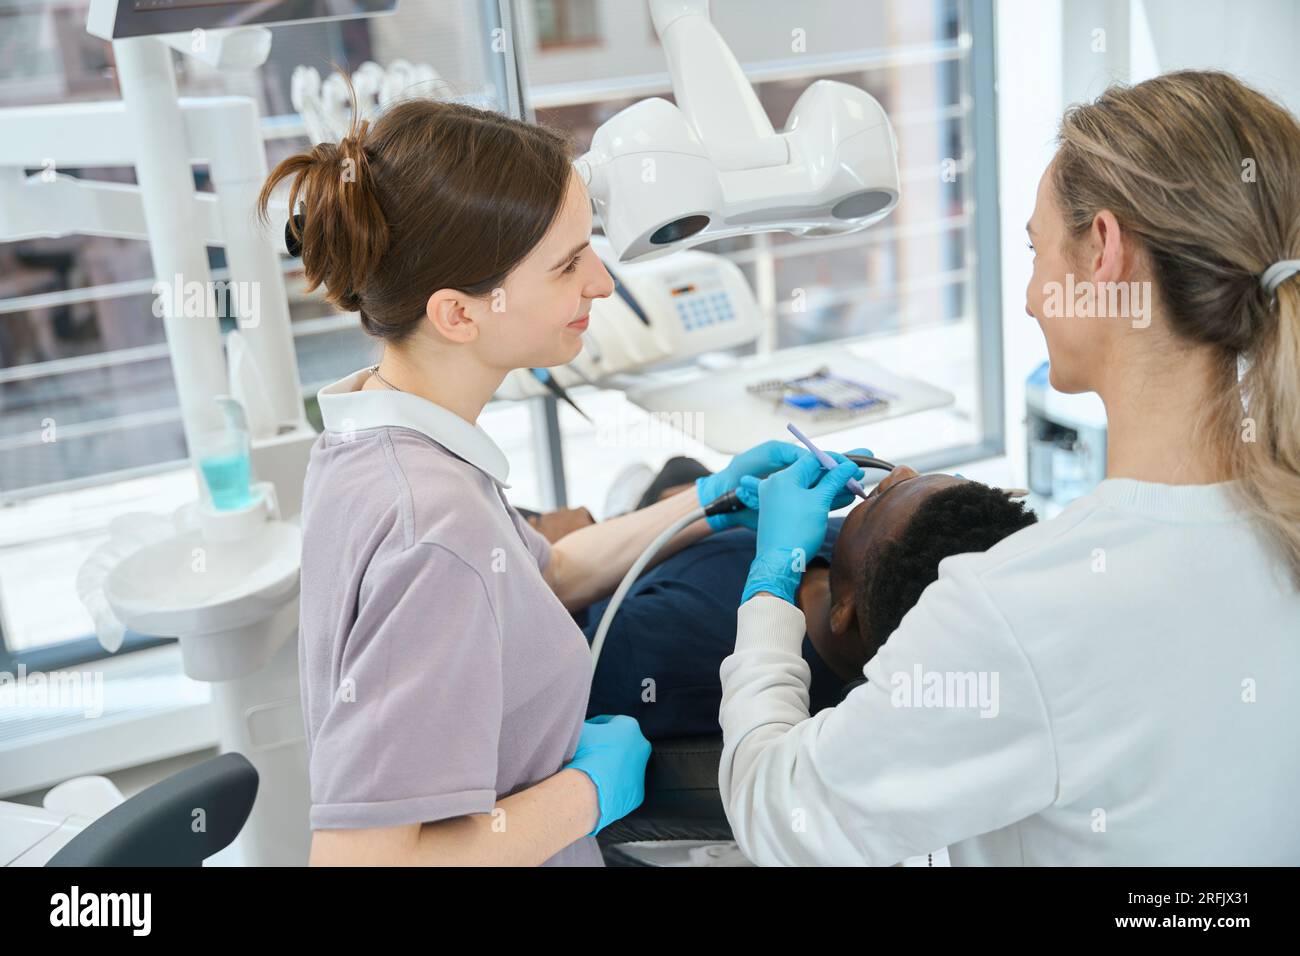 Smiling nurse holding saliva ejector while woman professional dentist keeping root canal therapy or filling teeth to African American client, professi Stock Photo